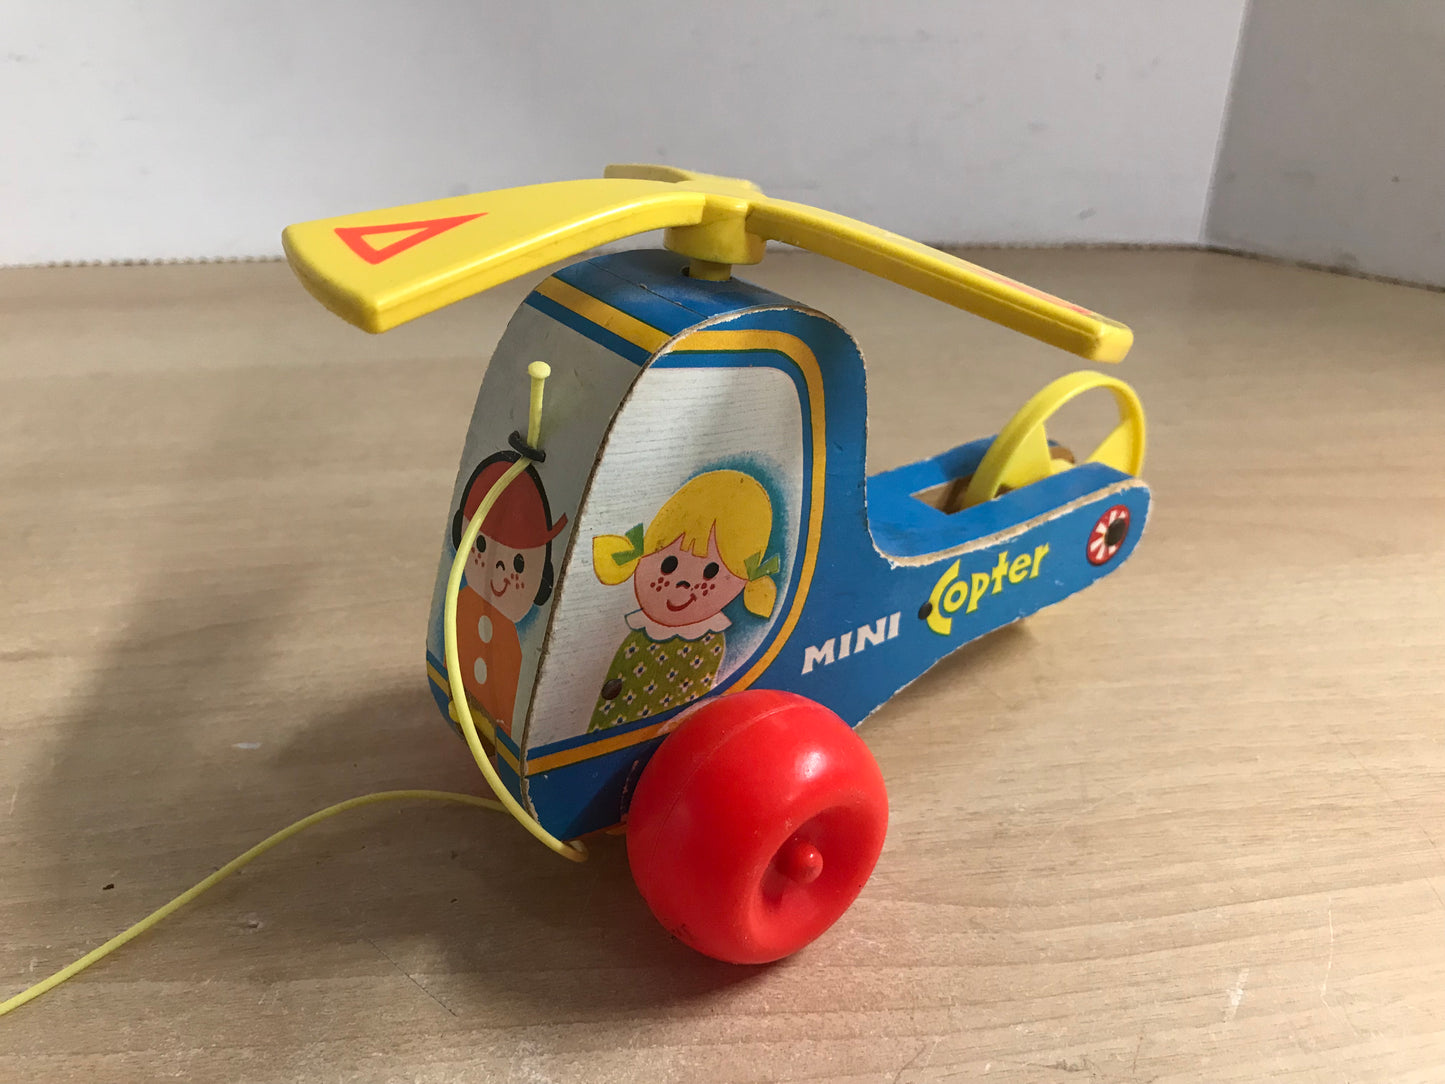 Fisher Price Vintage 1970 Wood Helicopter Pull Toy RARE Excellent